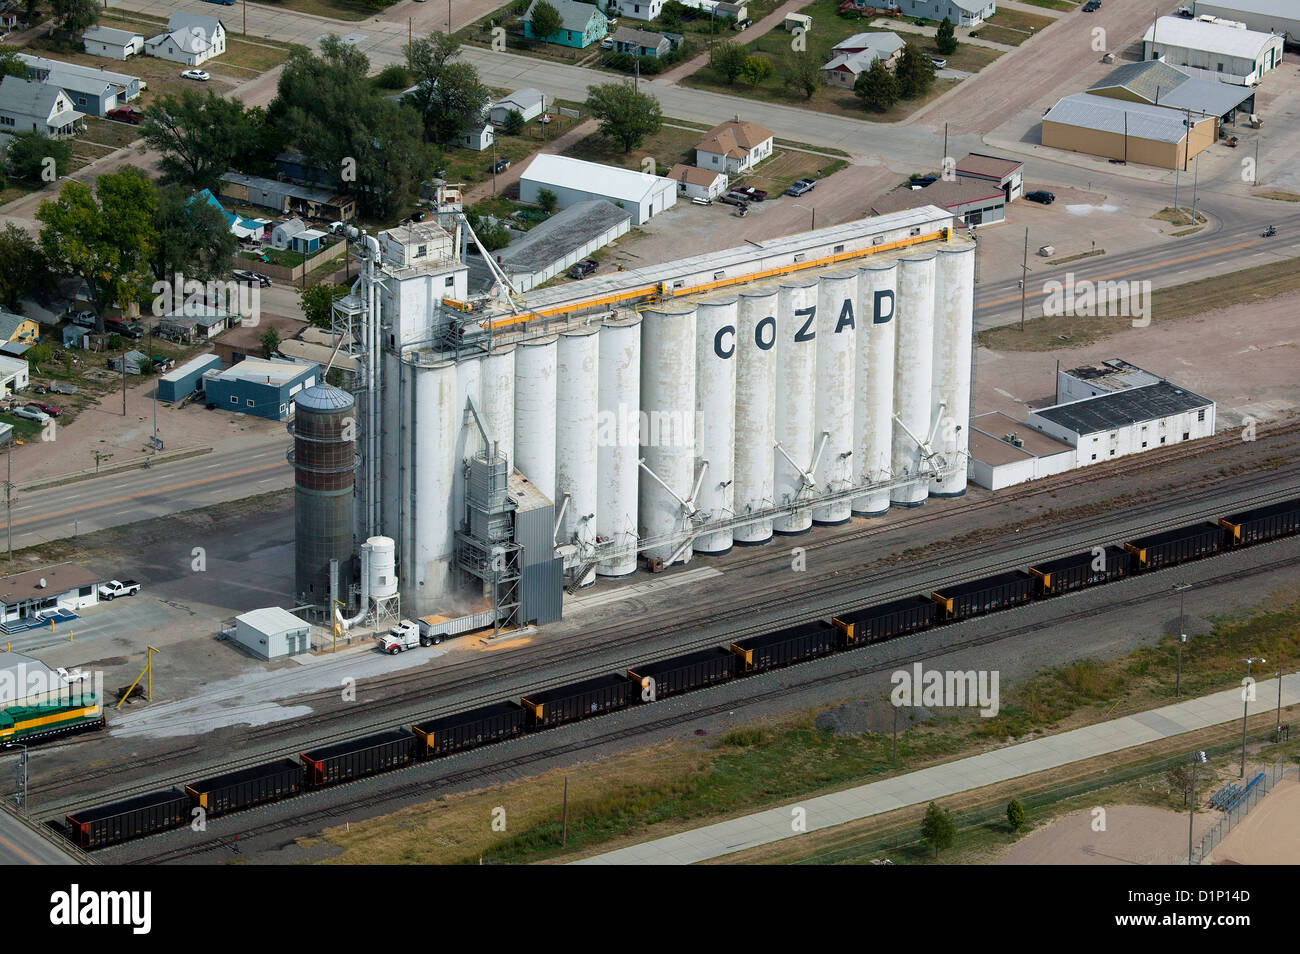 aerial photograph truck being loaded with corn at grain elevator Cozad, Nebraska Stock Photo